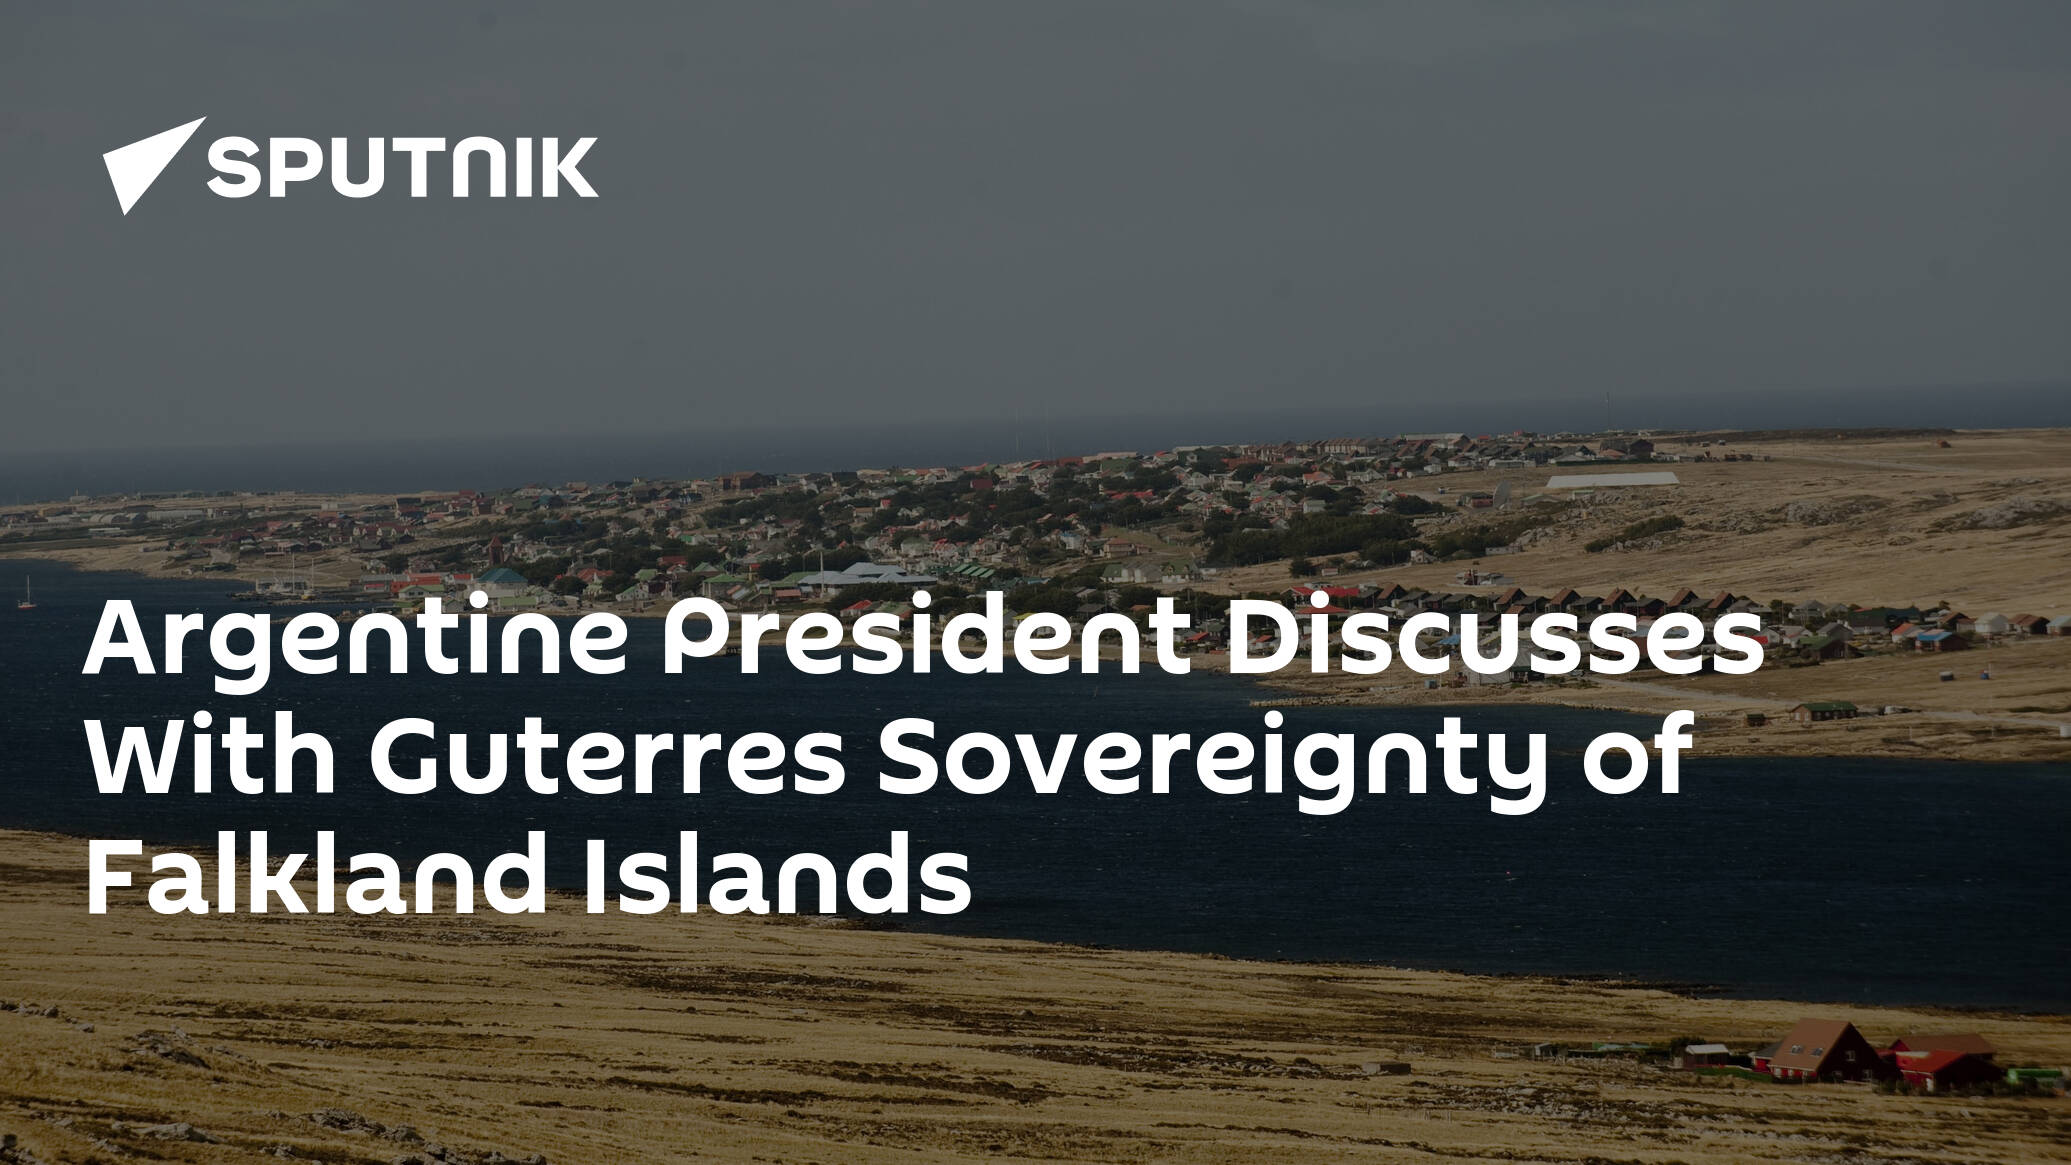 Argentine President Discusses With Guterres Sovereignty of Falkland Islands